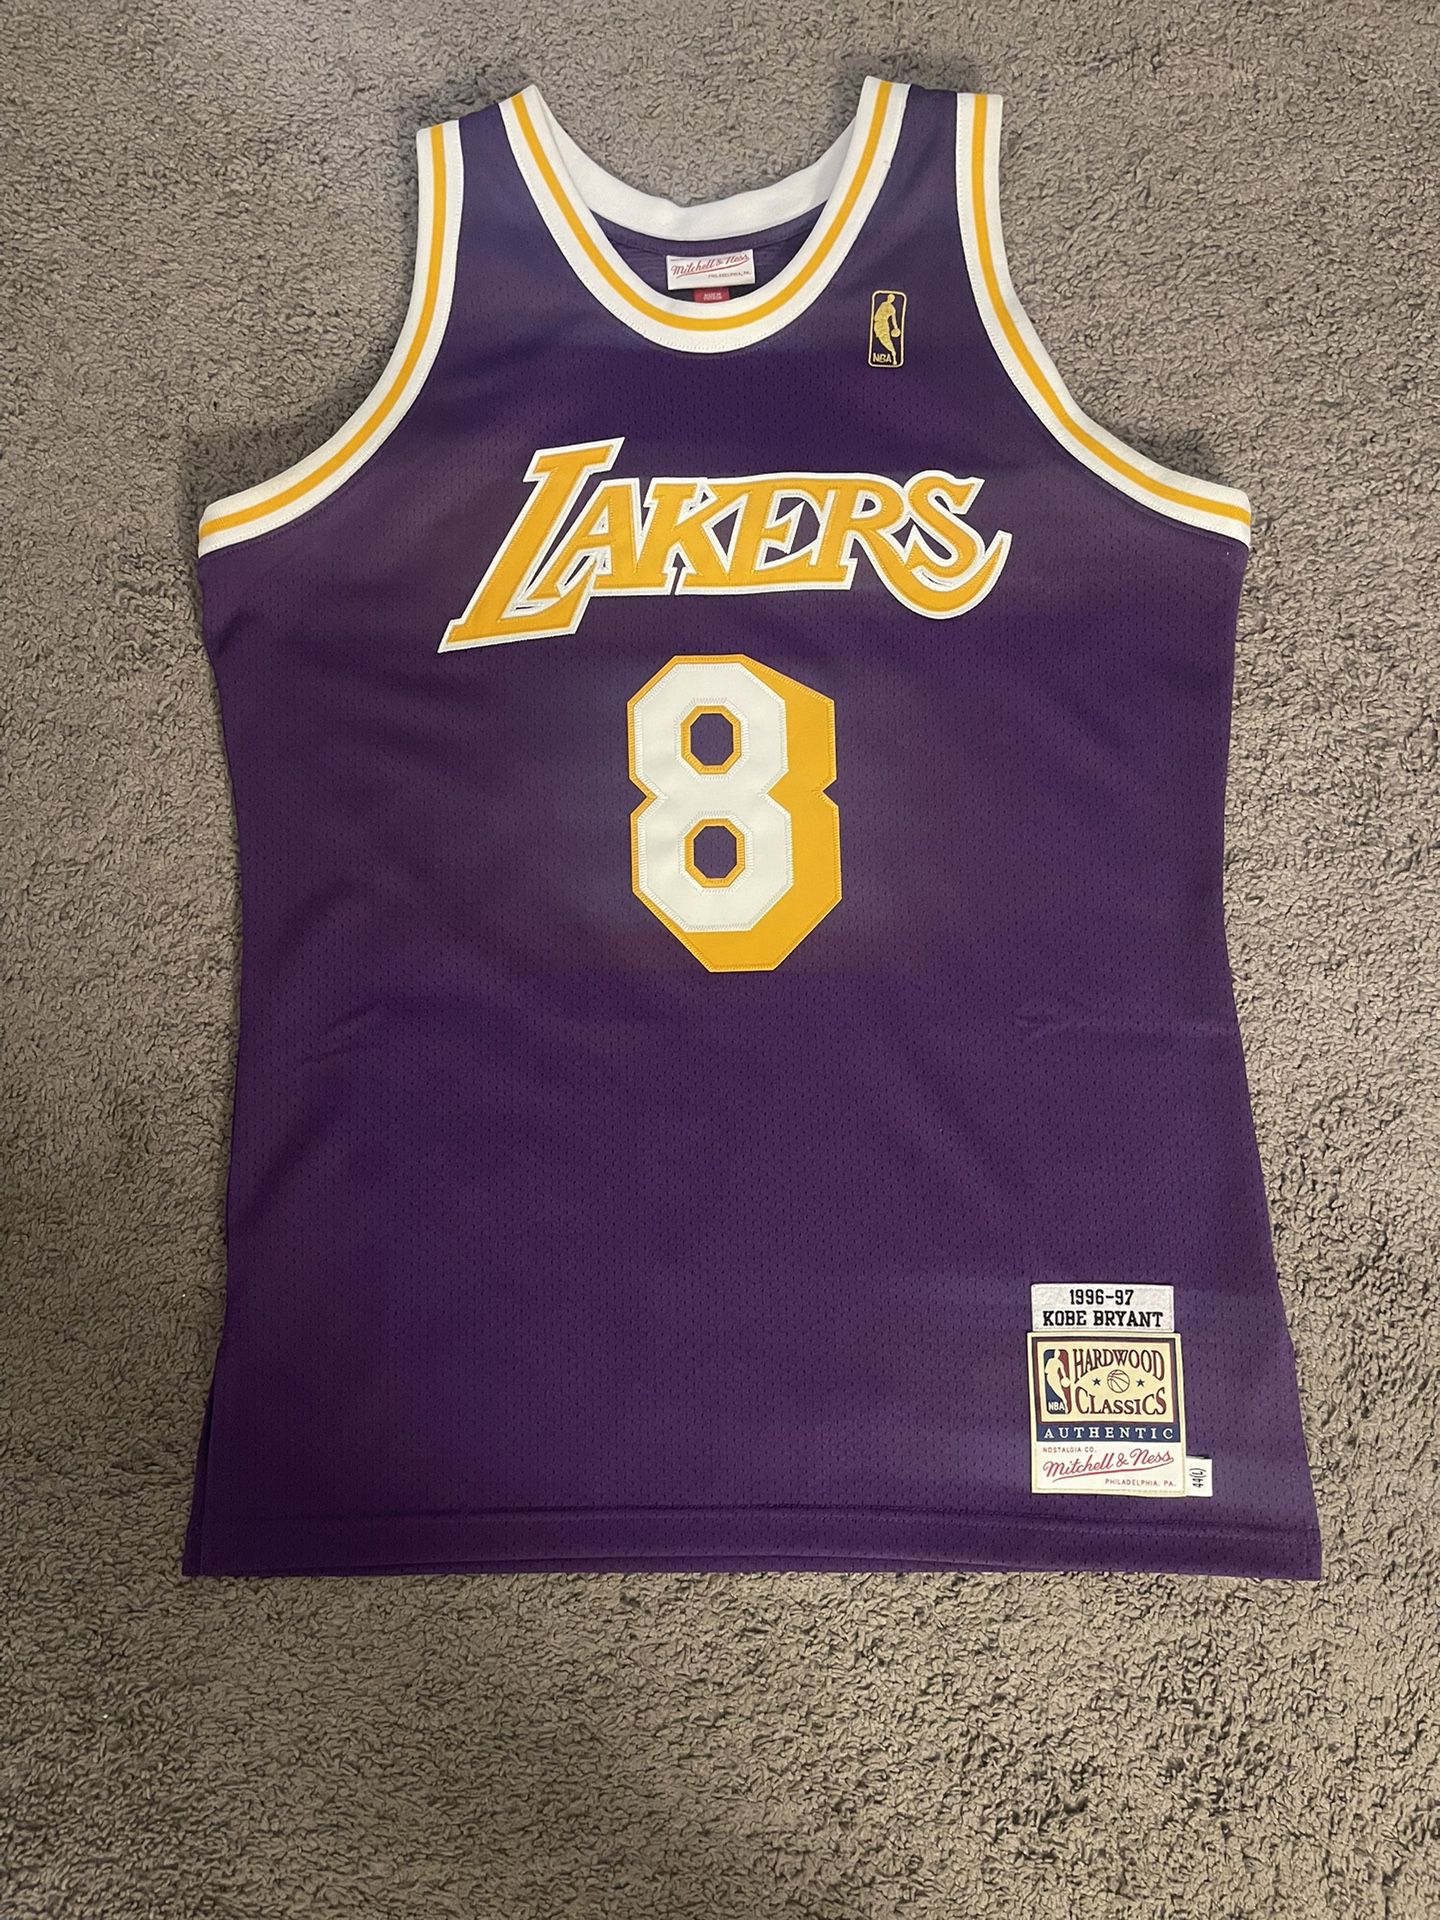 Authentic Kobe Bryant Jersey - Price Is Negotiable 